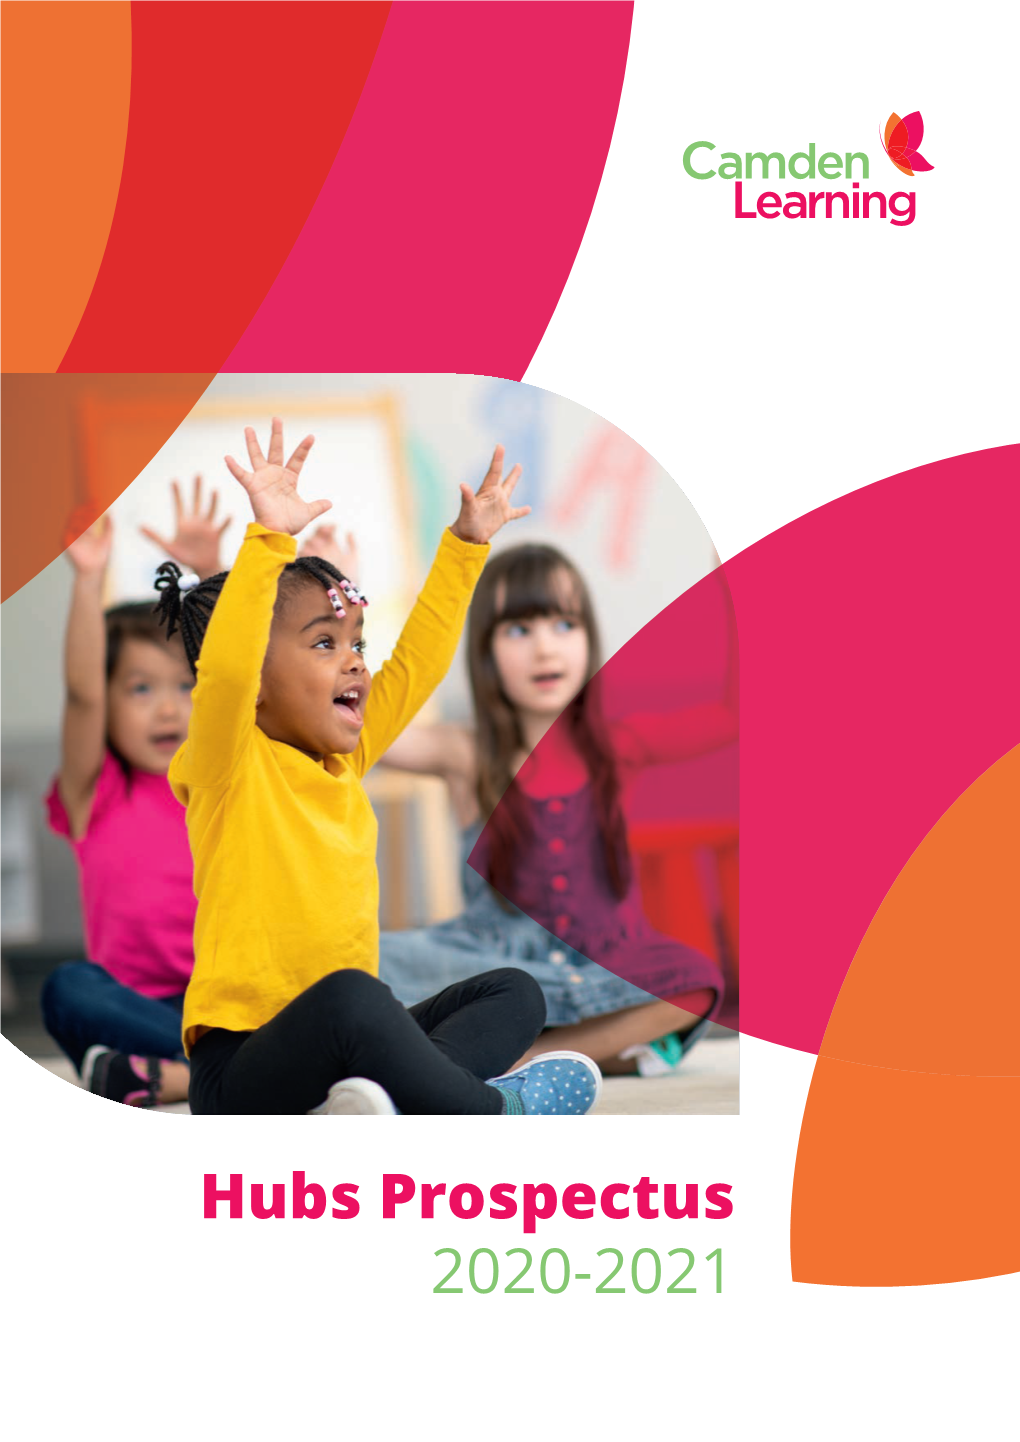 Hubs Prospectus 2020-2021 Is There a Restriction on the Introduction Number of Schools Able to Join Each Hub?